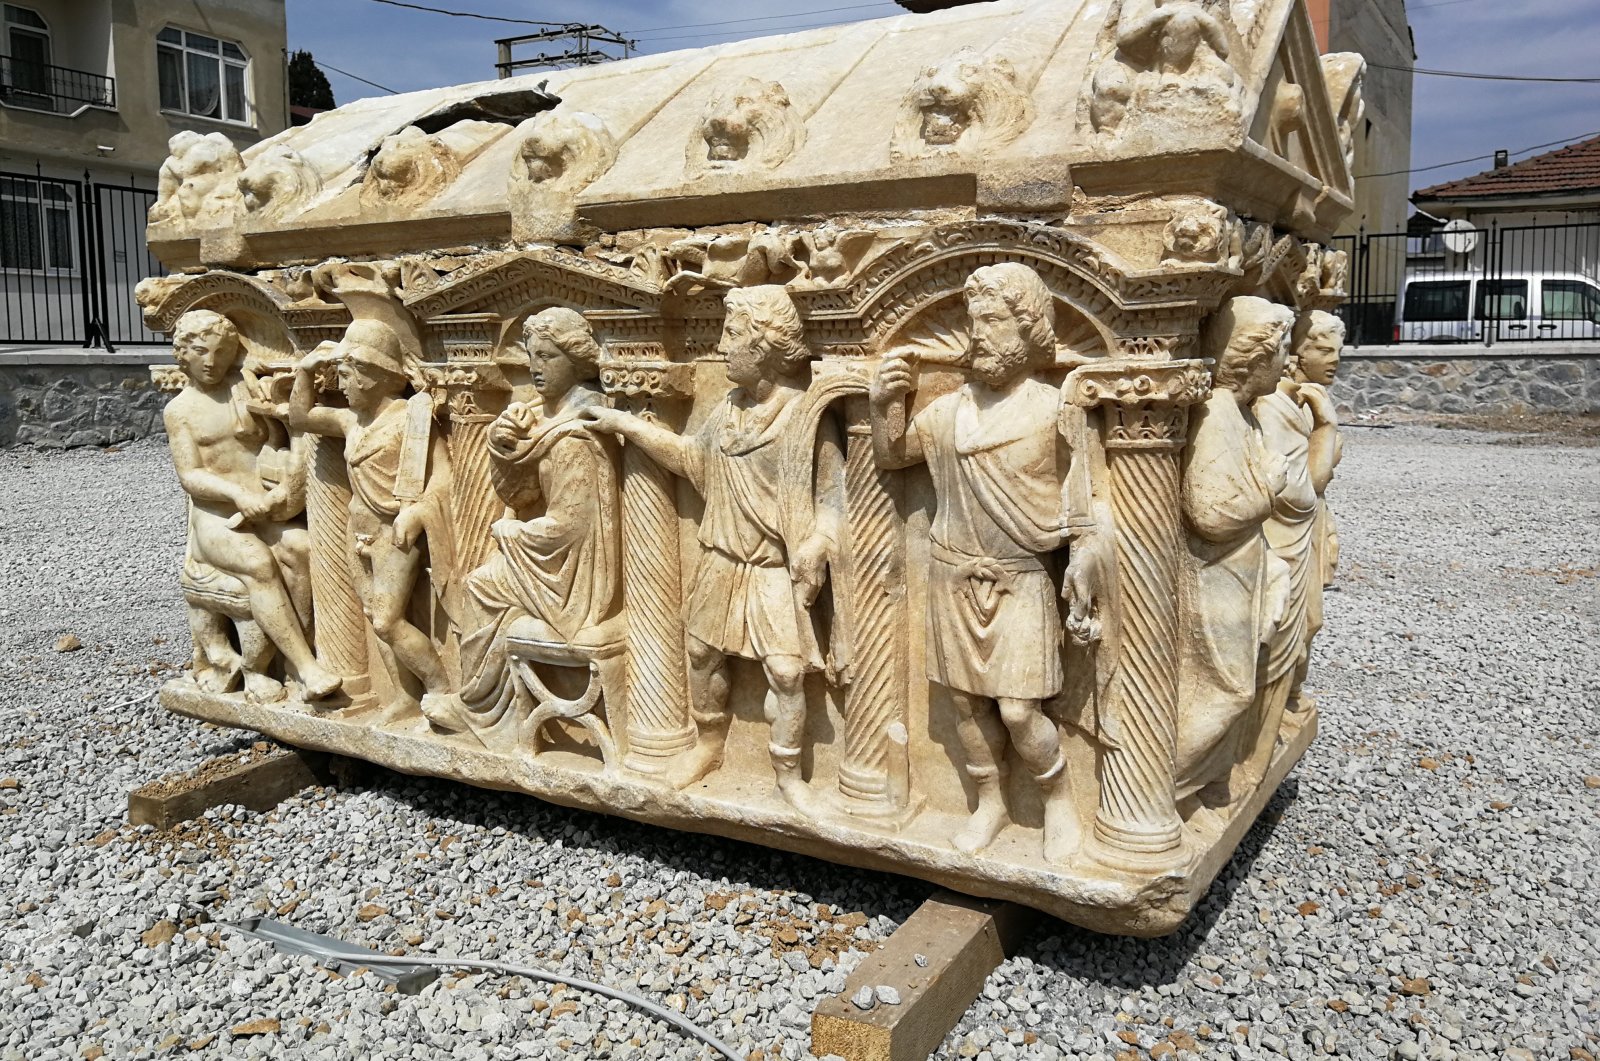 The sarcophagus was found in an olive field in Bursa province's Iznik district in 2015. (İHA PHOTO)